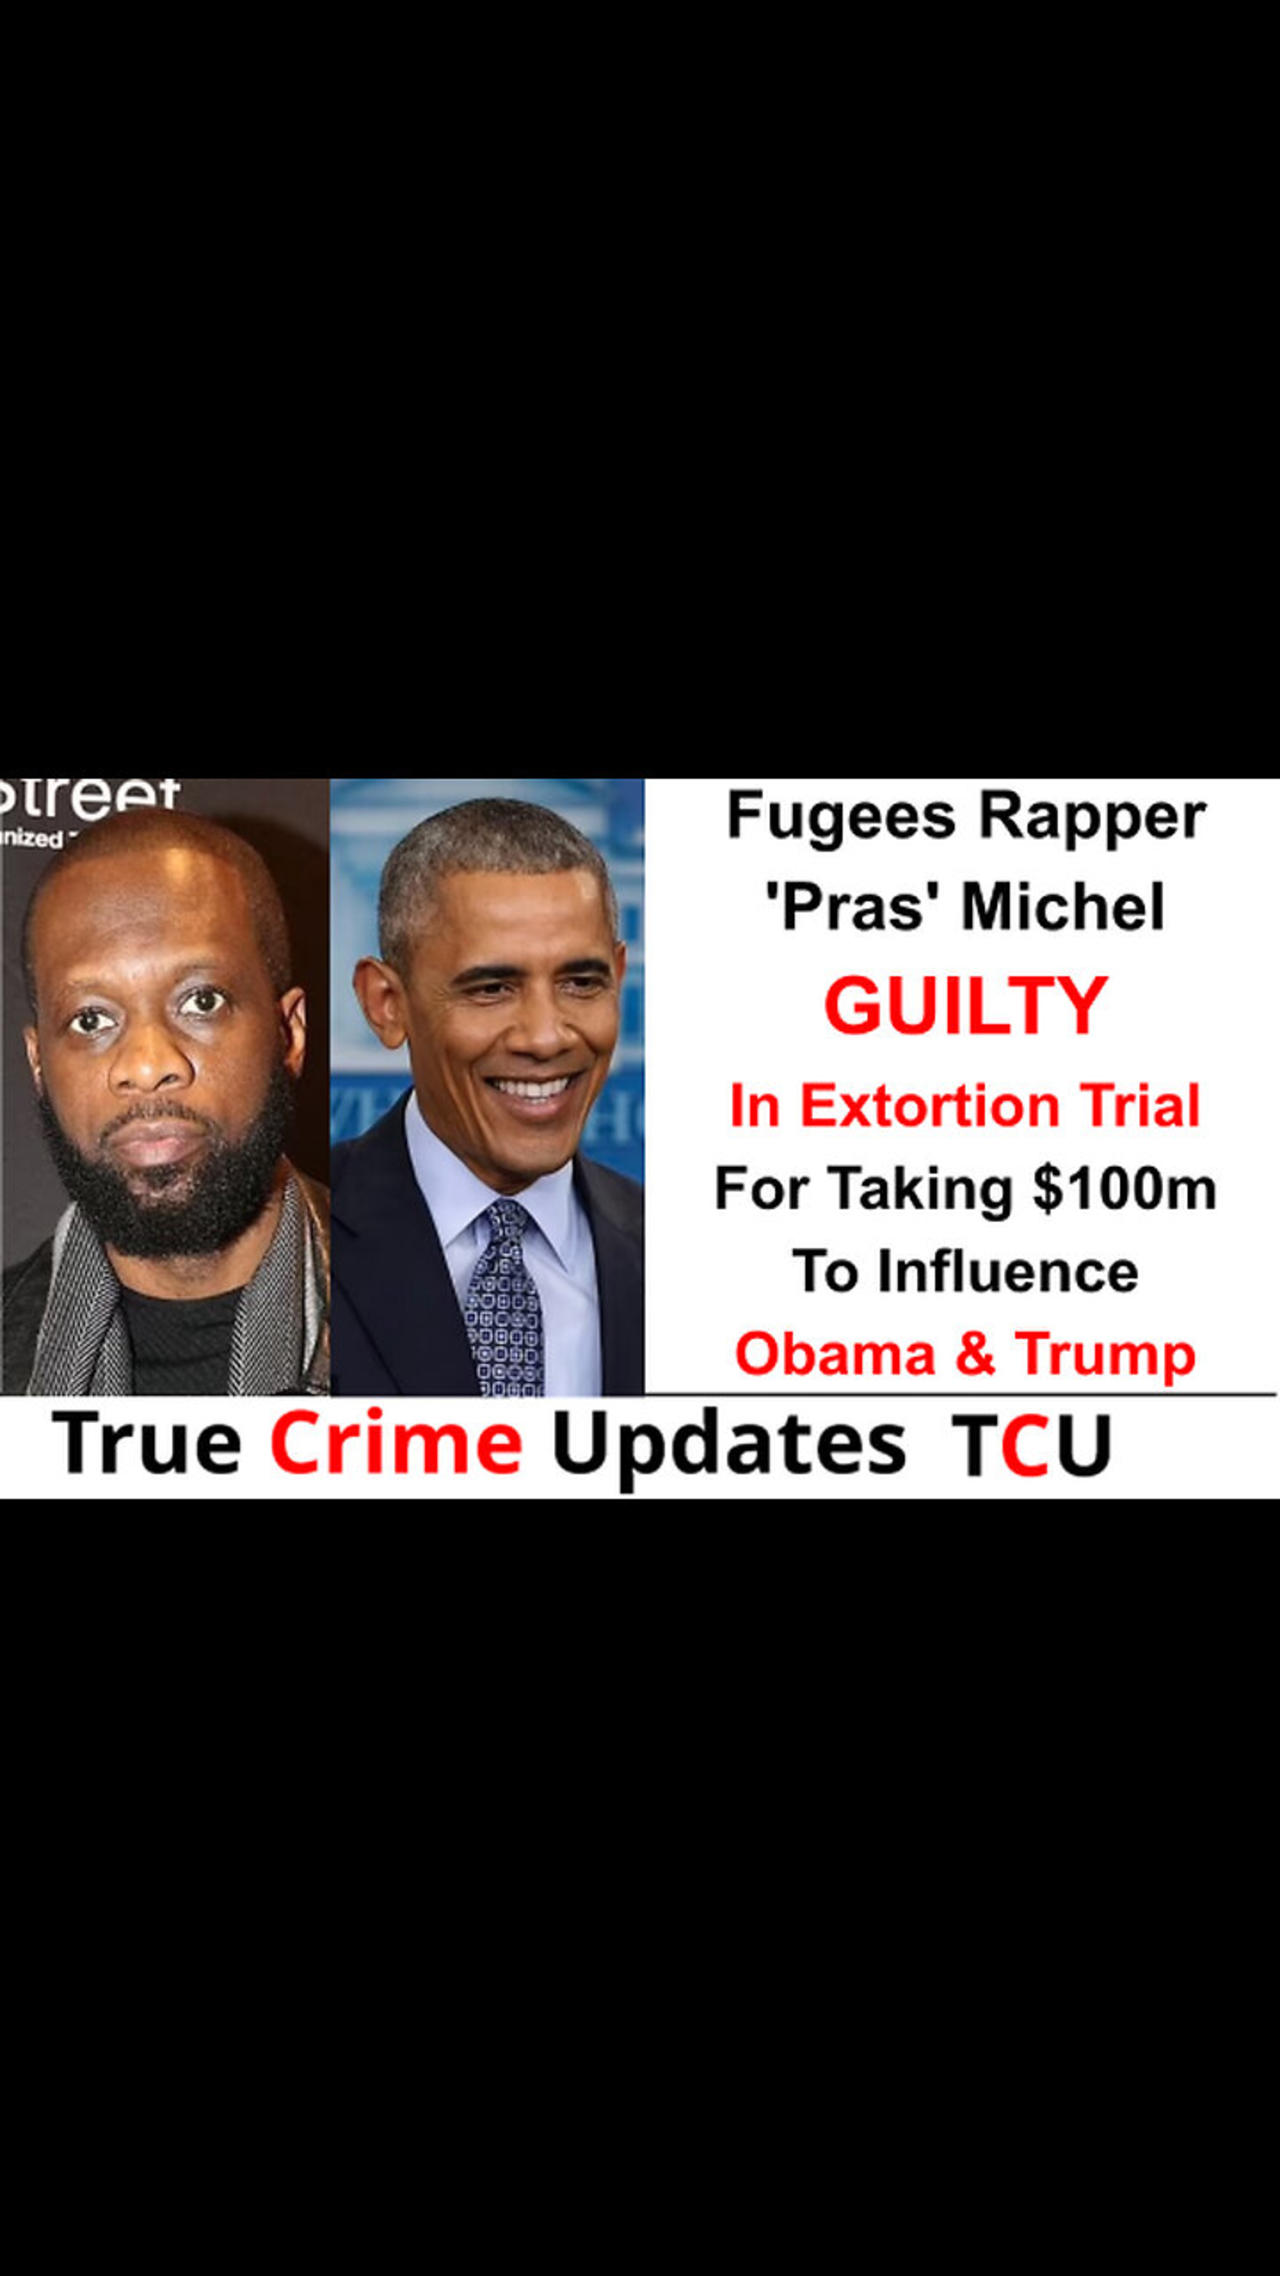 Fugees Rapper 'Pras' Michel GUILTY In Extortion Trial For Taking $100m To Influence Obama & Trump